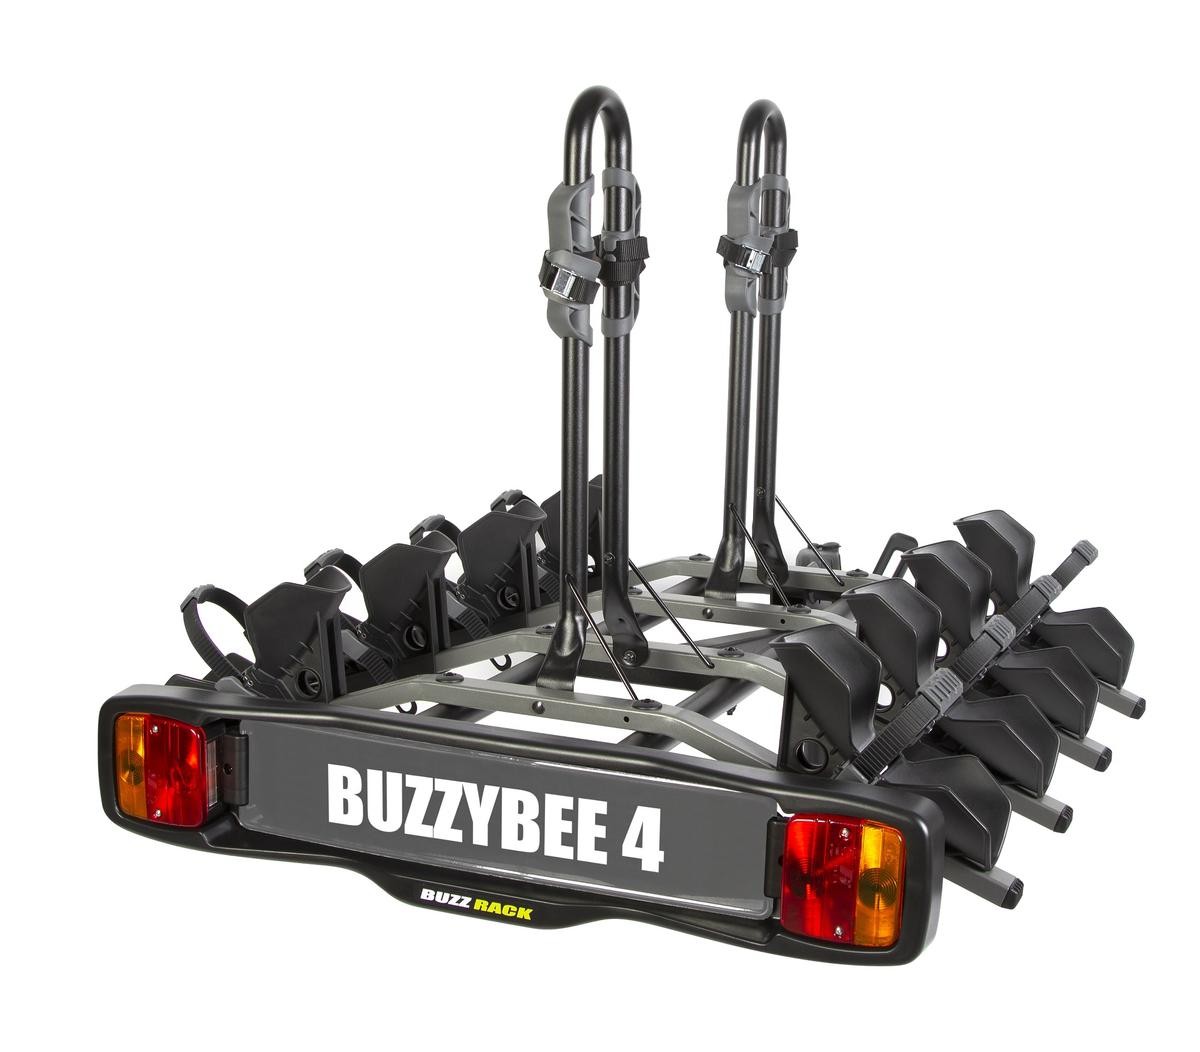 Rear cycle carrier BUZZ RACK 5989